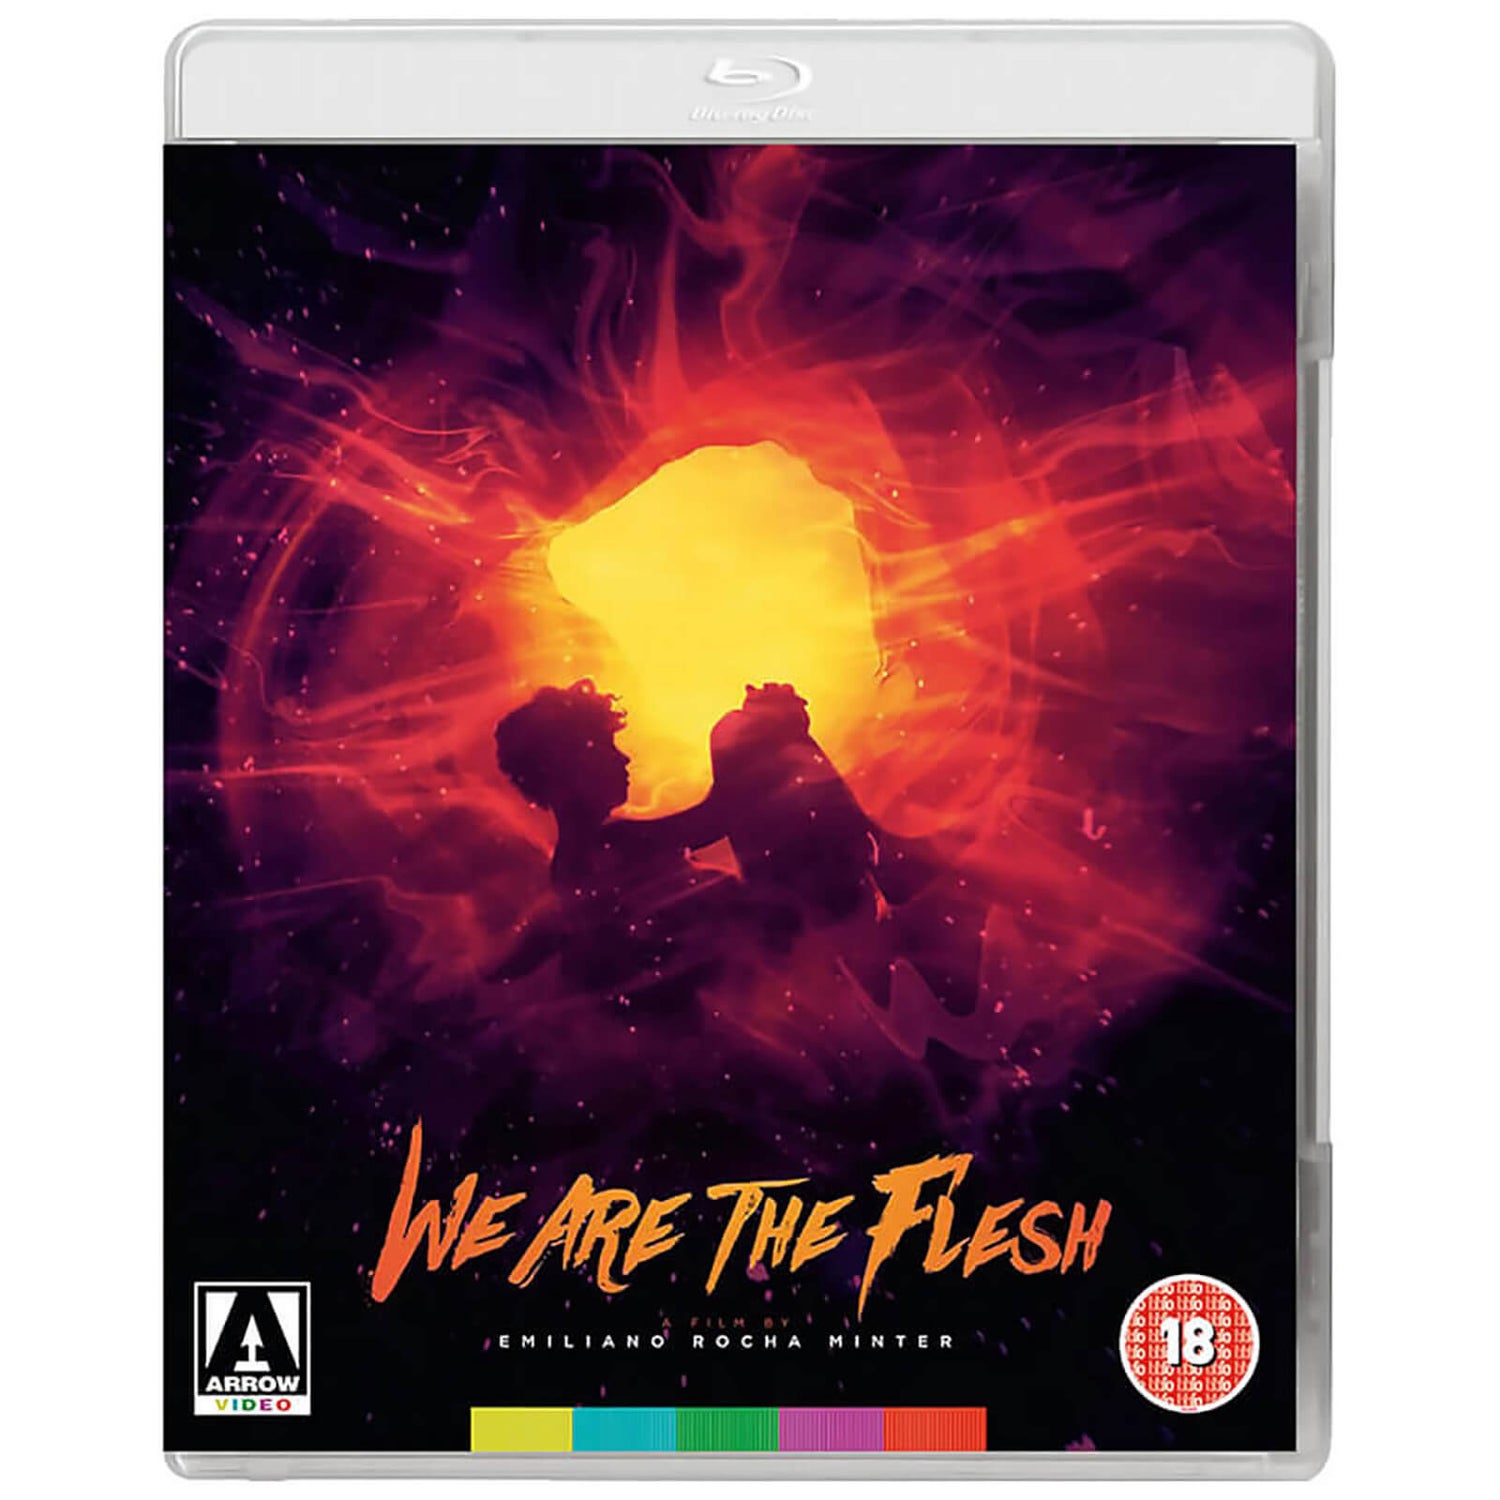 We Are The Flesh Blu-ray